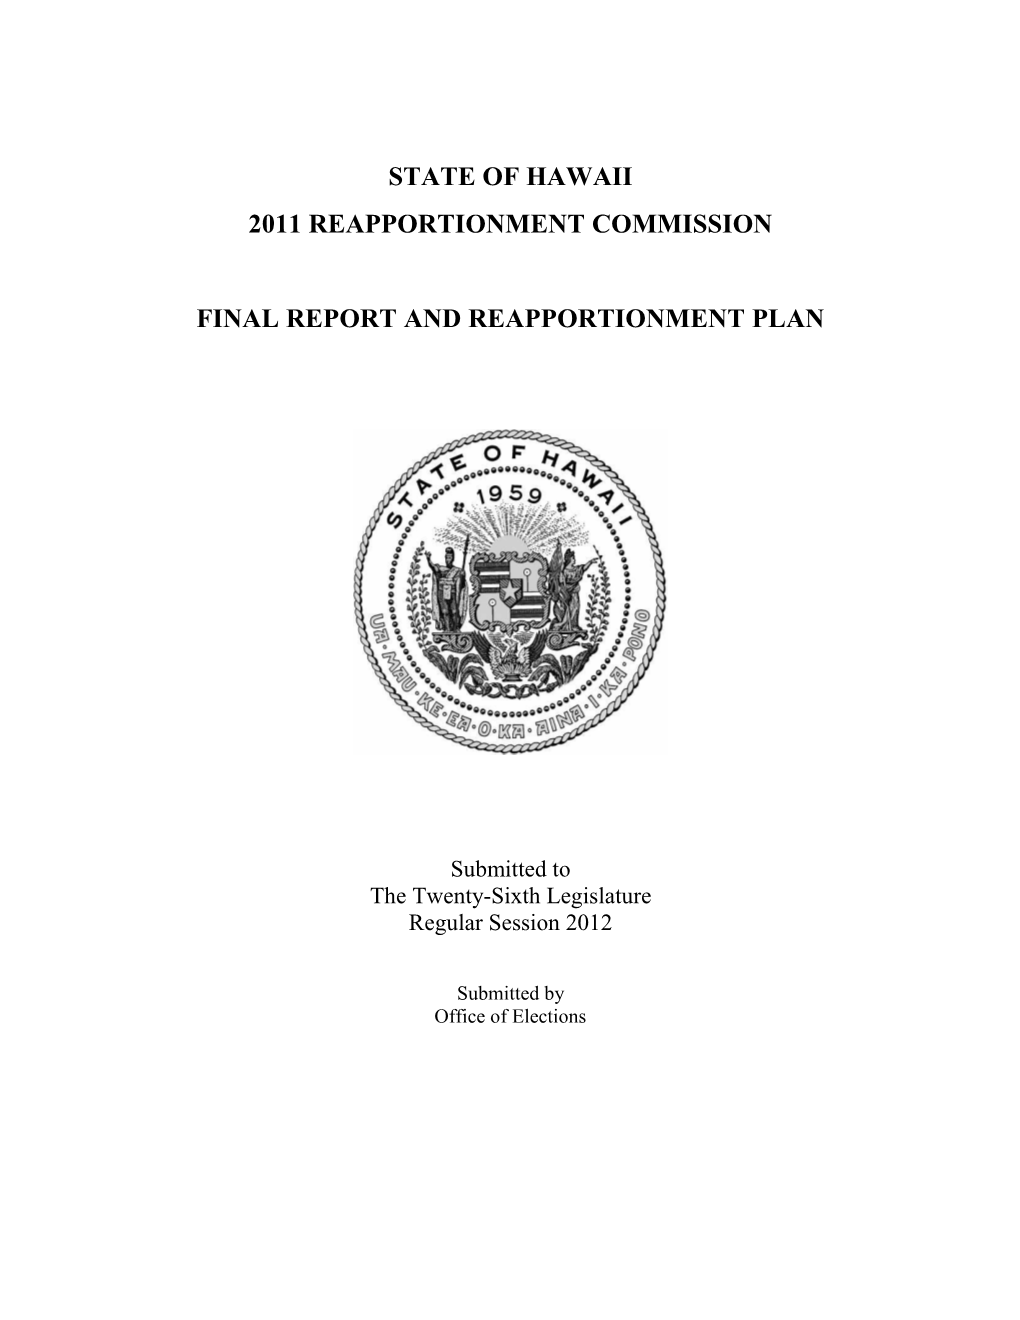 State of Hawaii 2011 Reapportionment Commission Final Report And